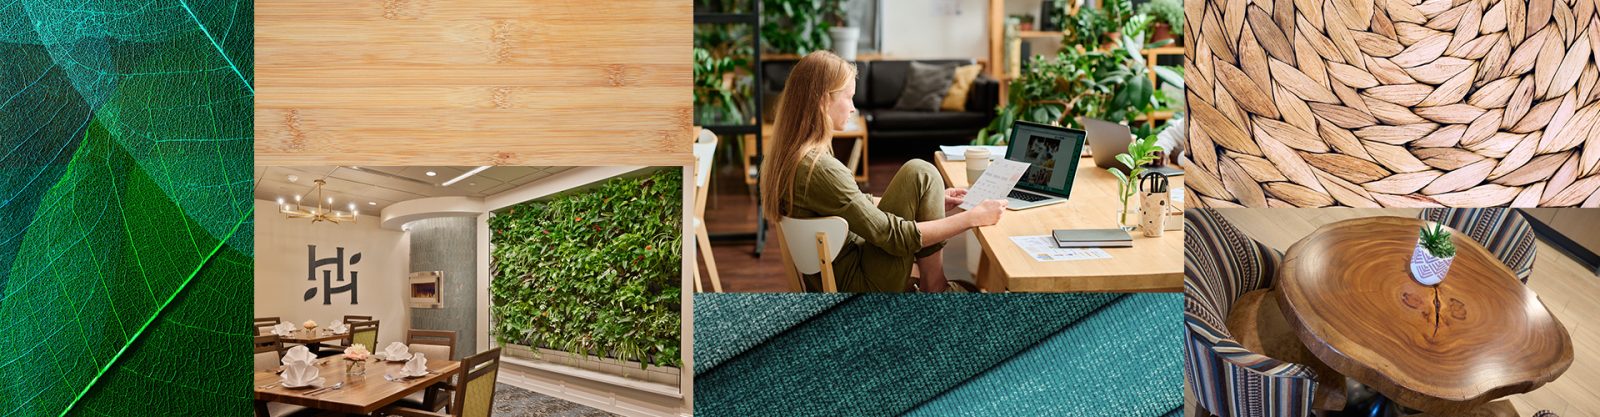 Nature Connections: Biophilic Design Strategies for Interior Spaces